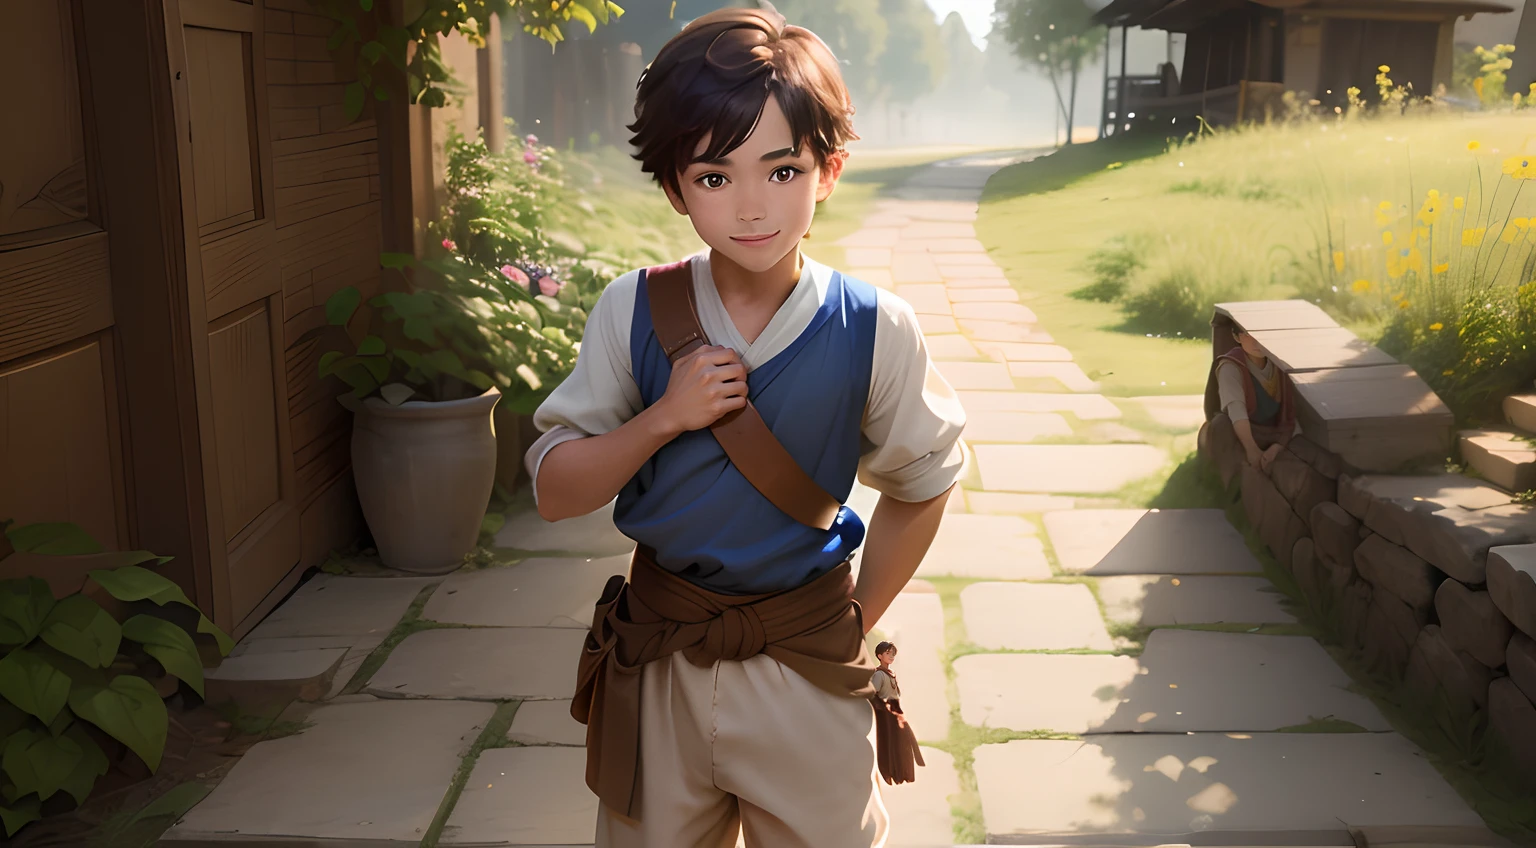 One fine morning, a young and curious villager named Ethan approached Master Eldric with a humble request: "Master, I yearn to improve my life each day. Can you guide me on this journey?" Handsome young boy, cute and curious and friendly, humble, joyful, light smile, full body shot